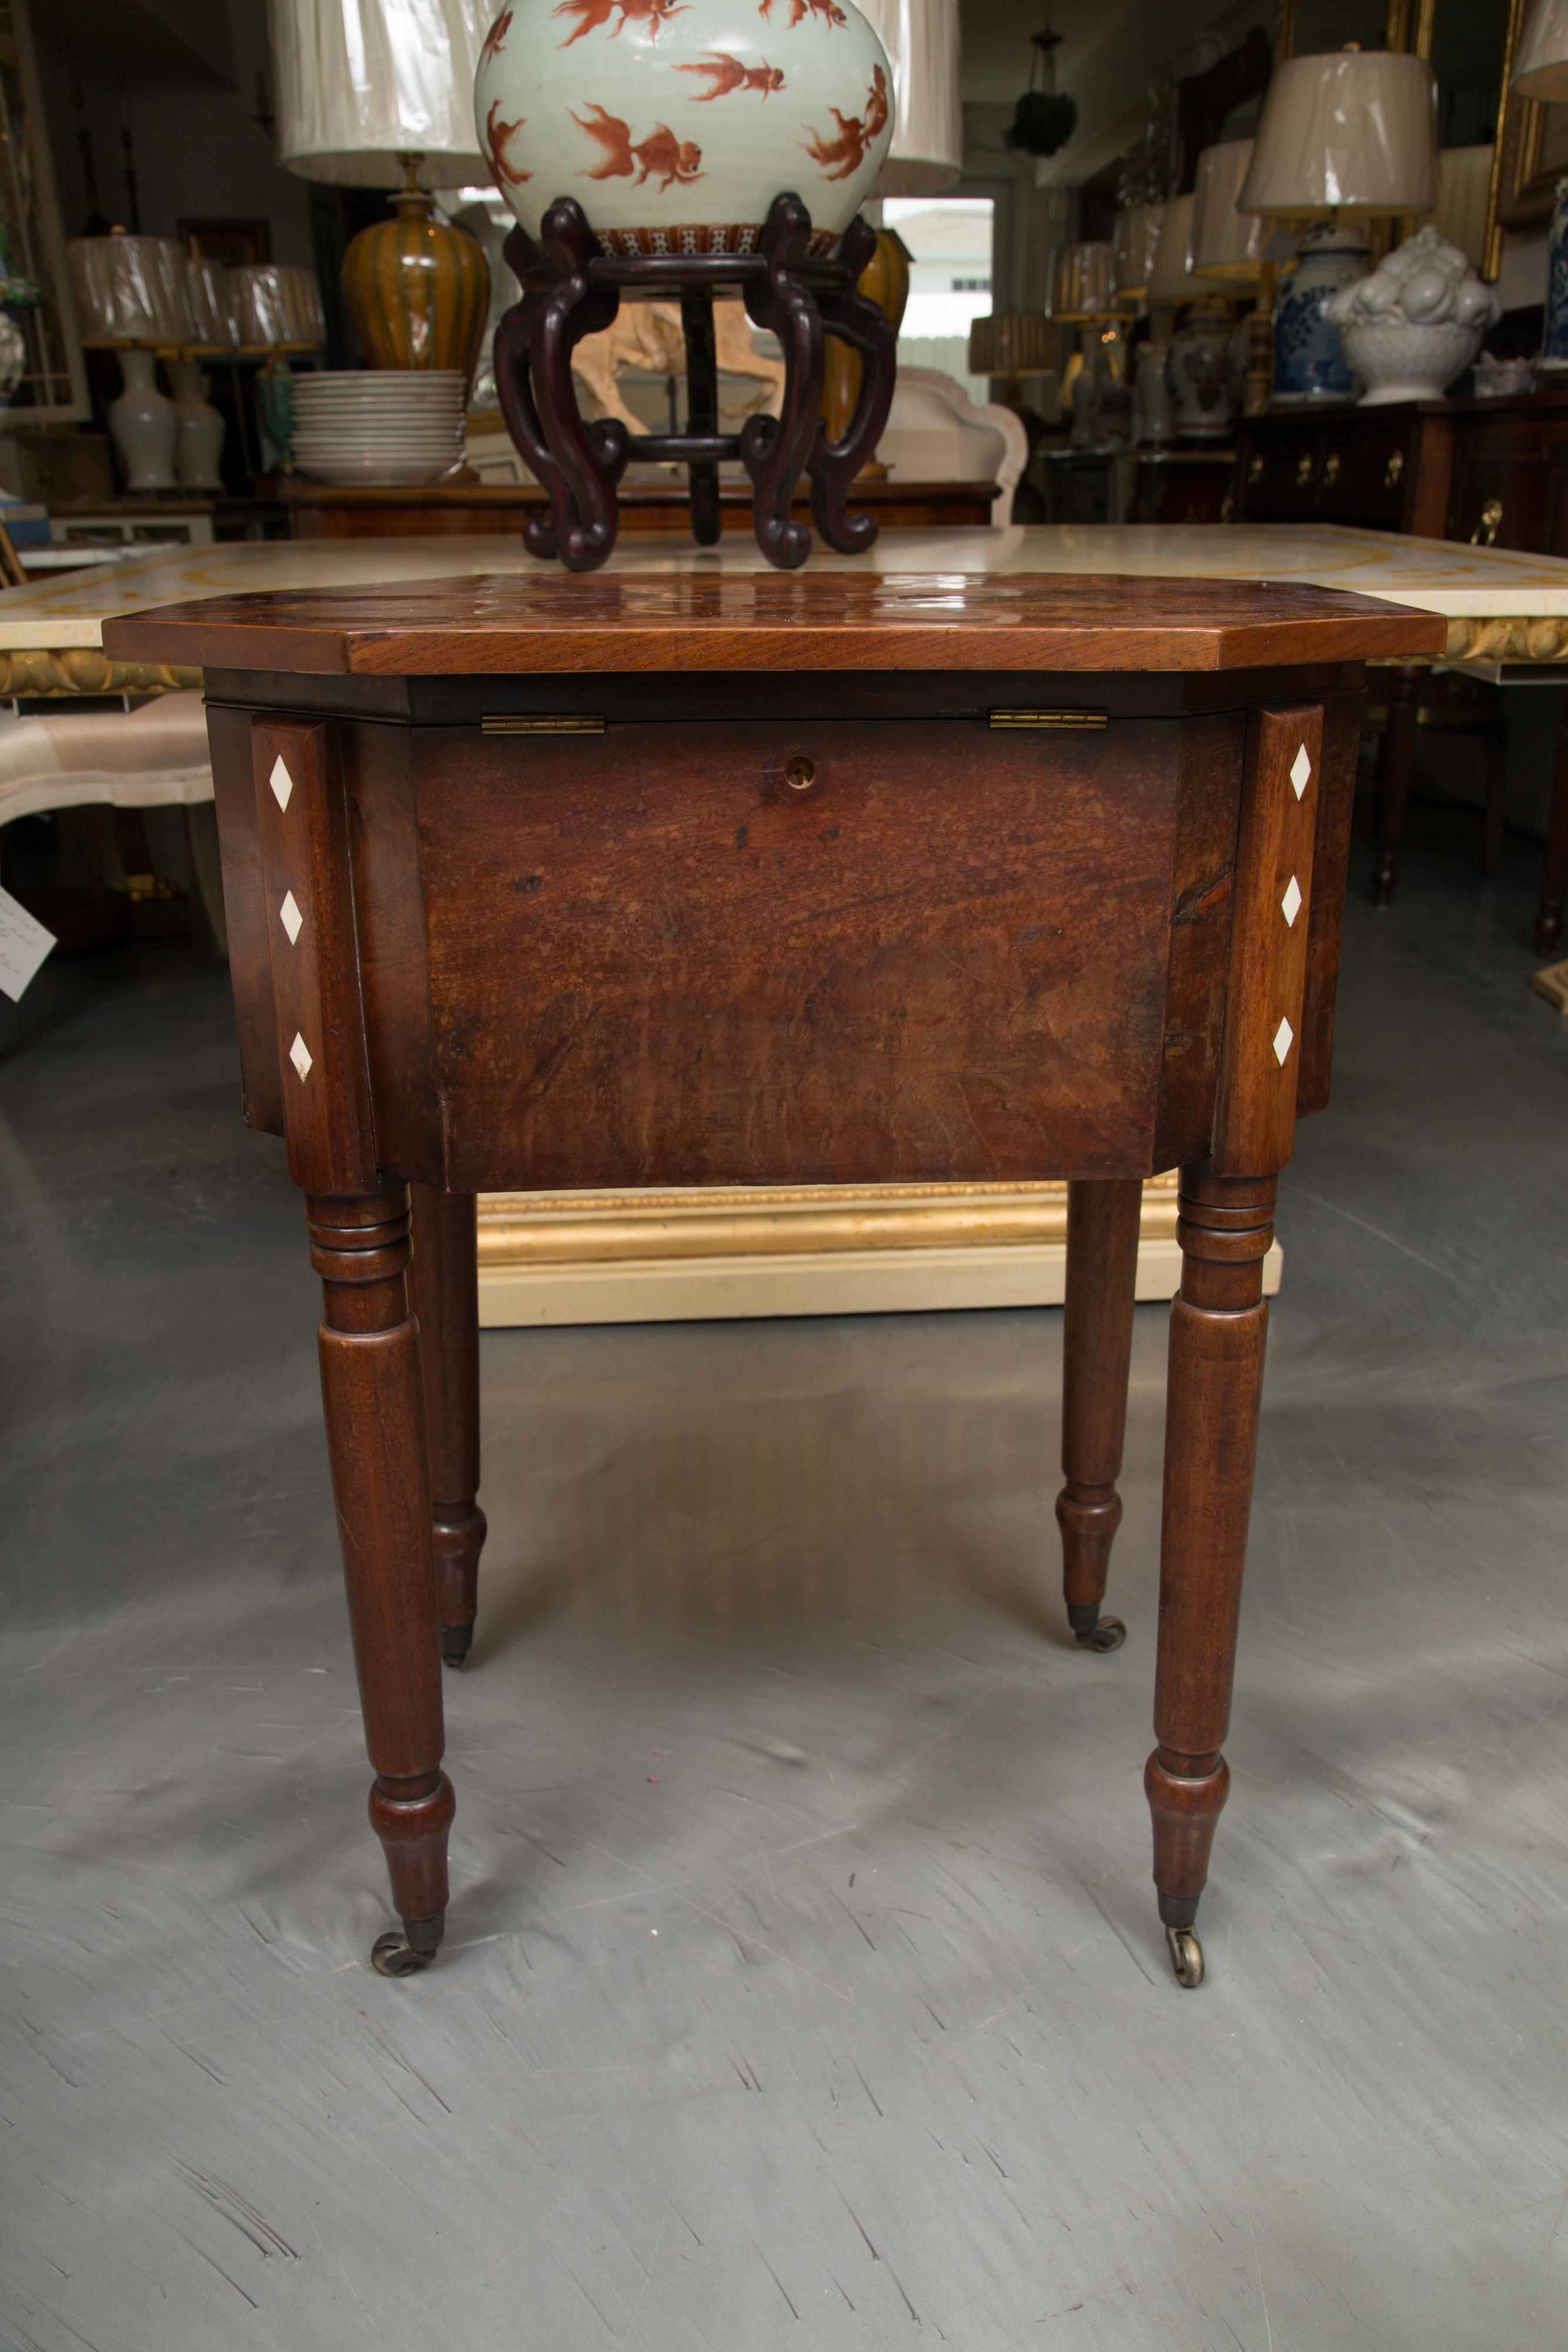 This is a very collectible period Charles X mahogany sewing table. There is a lift top with canted corners and pie-shaped veneers centered by an inlaid checker board above a bank of three drawers with decorative accents. The table is supported by